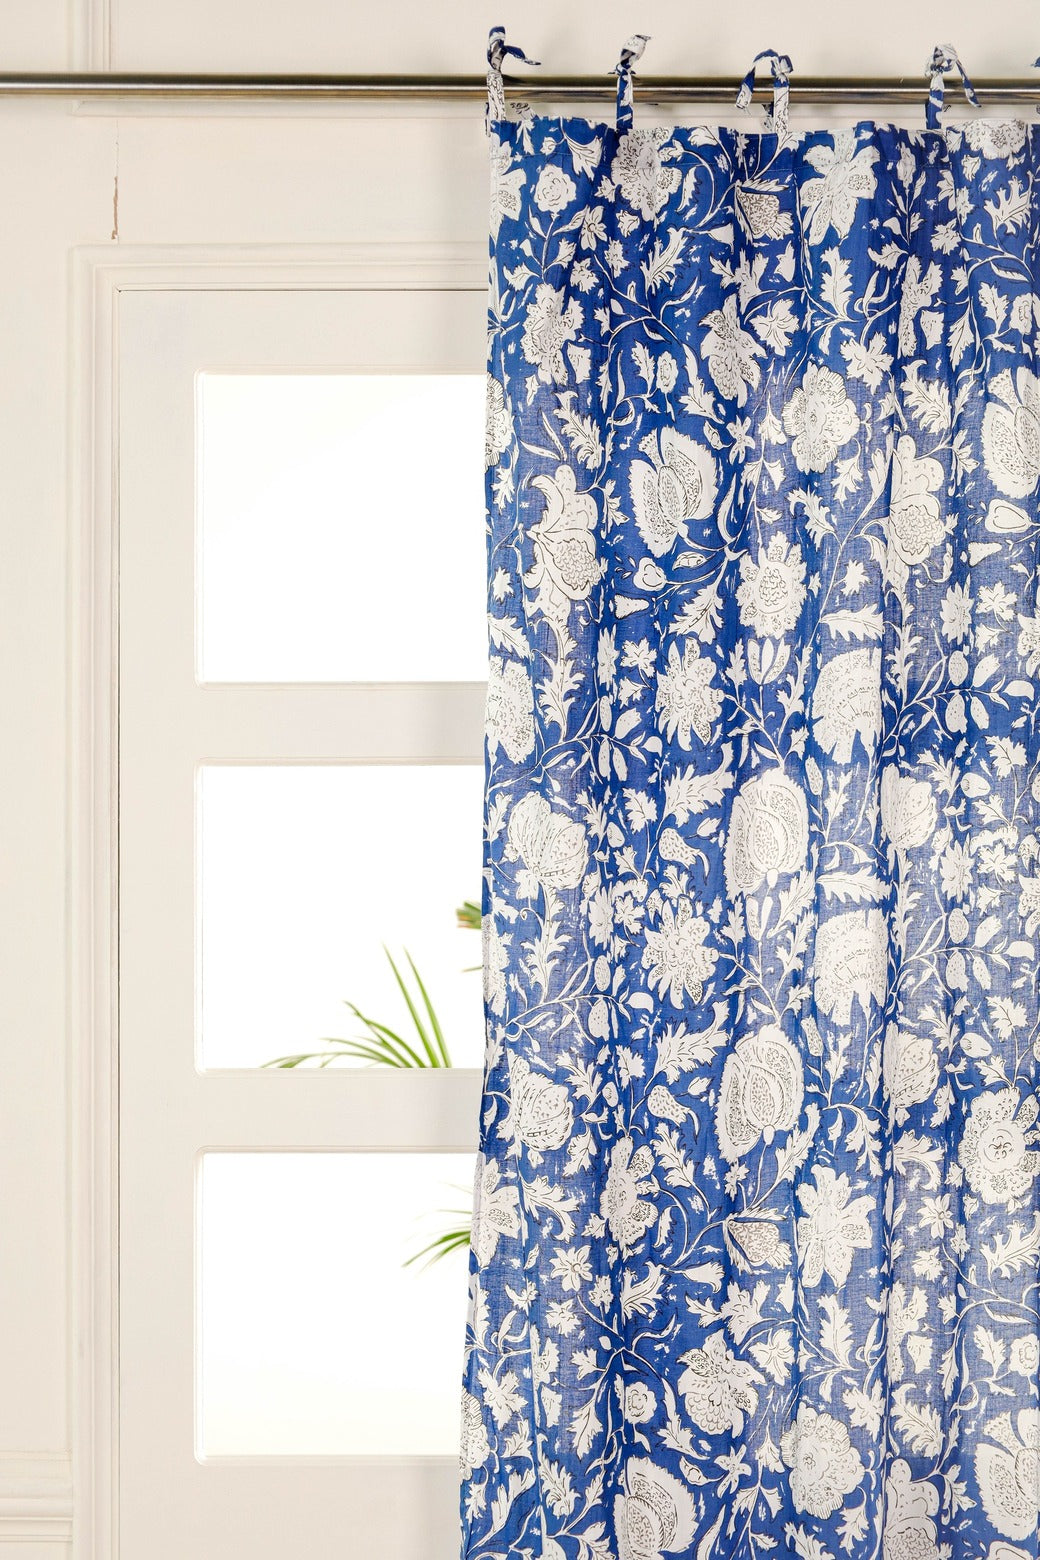 Blue and White Floral Printed Curtain - 1 Panel Set